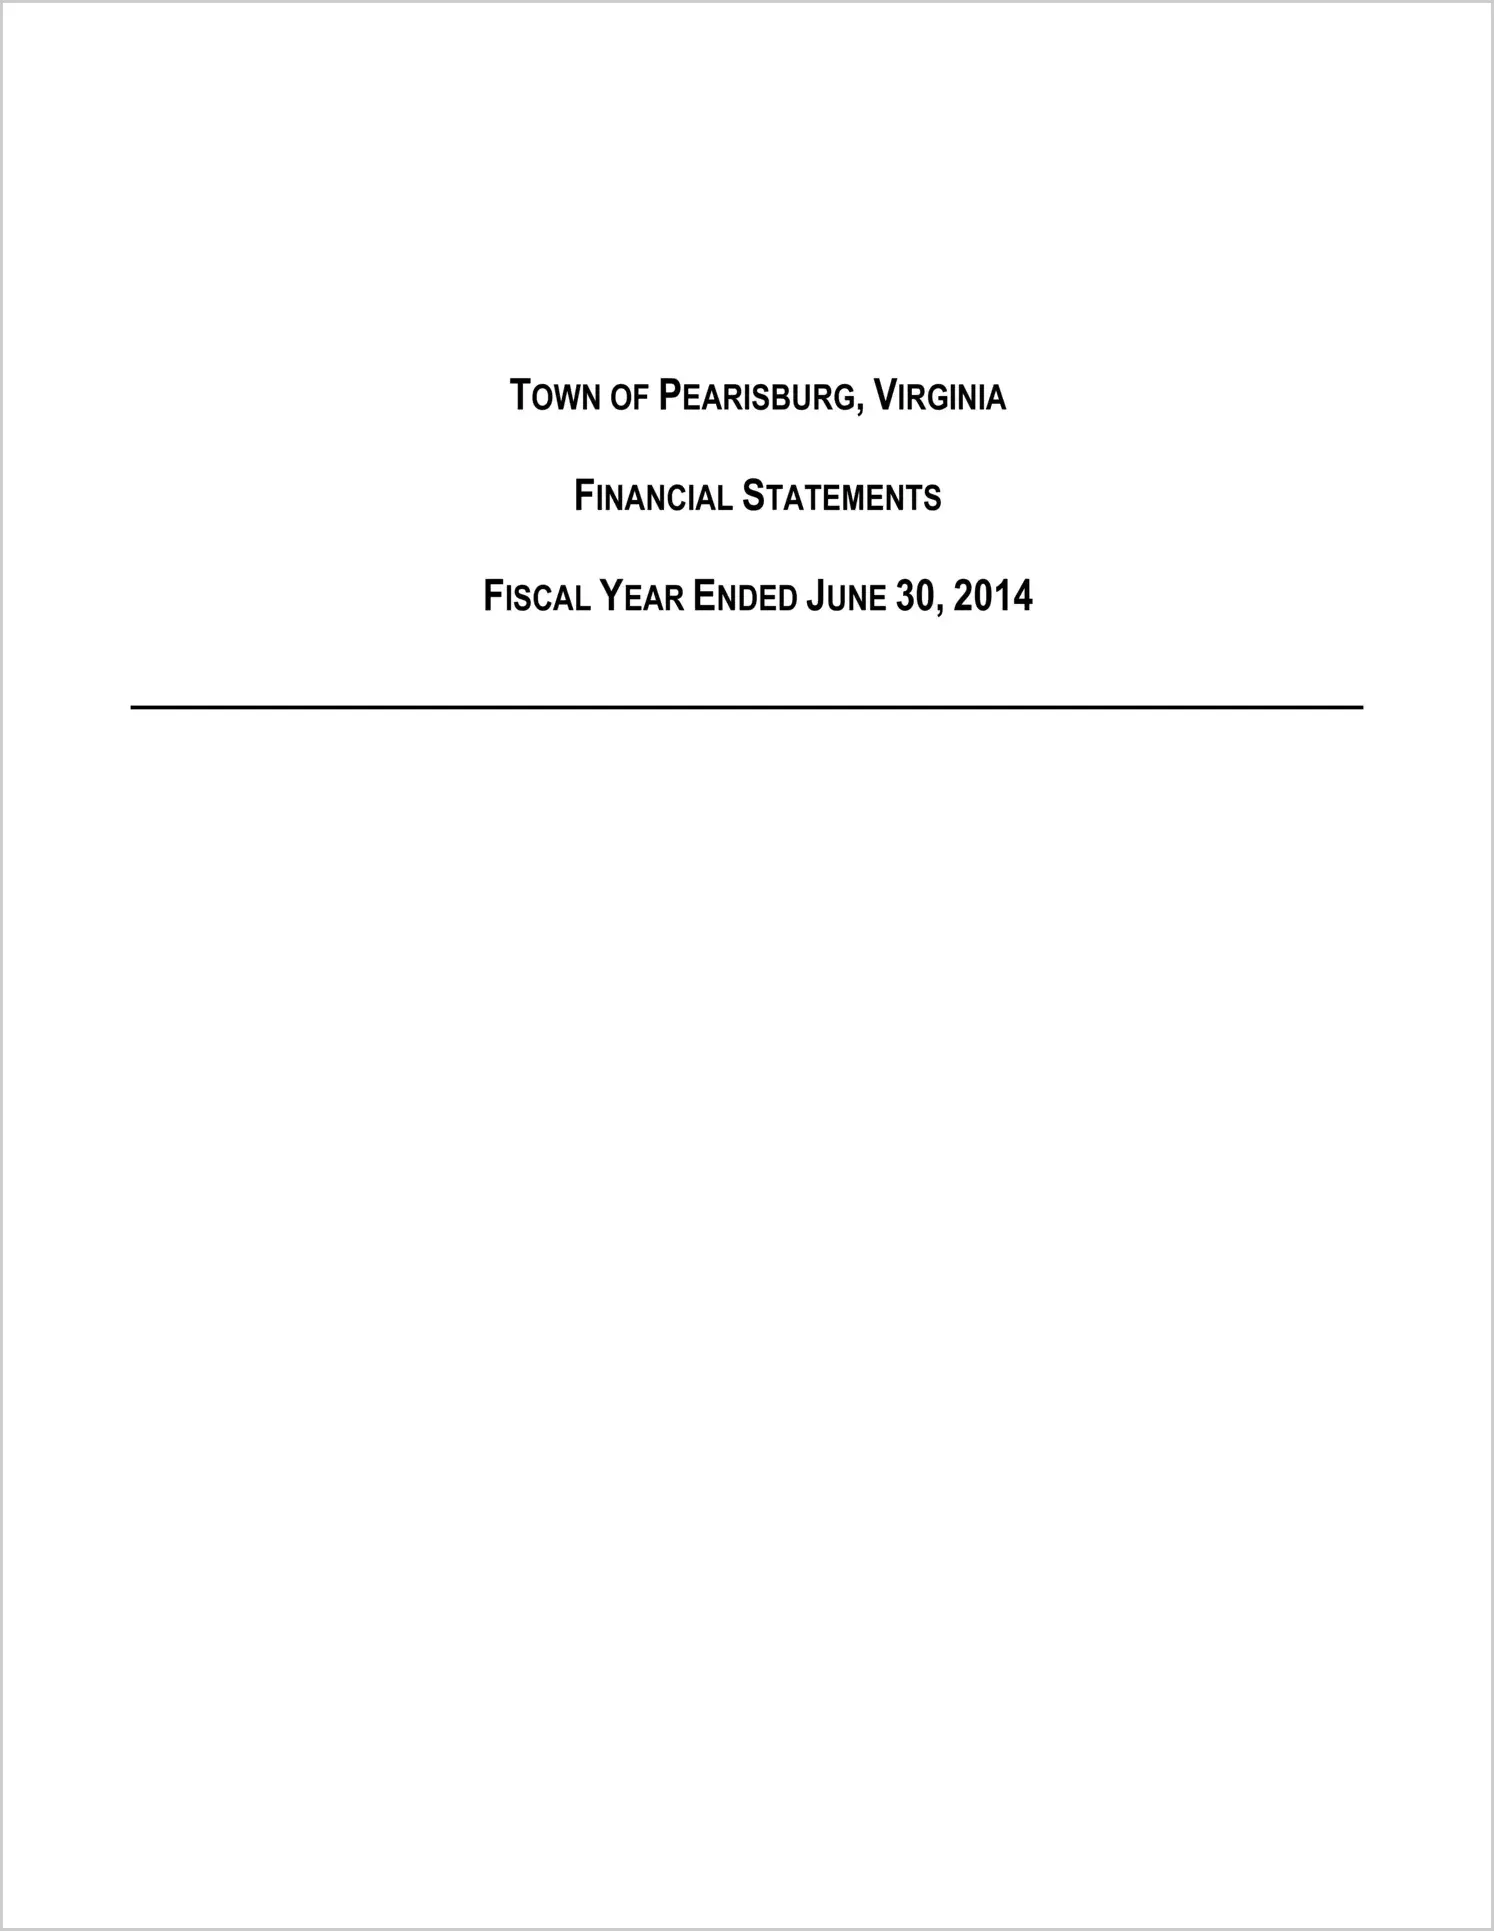 2014 Annual Financial Report for Town of Pearisburg